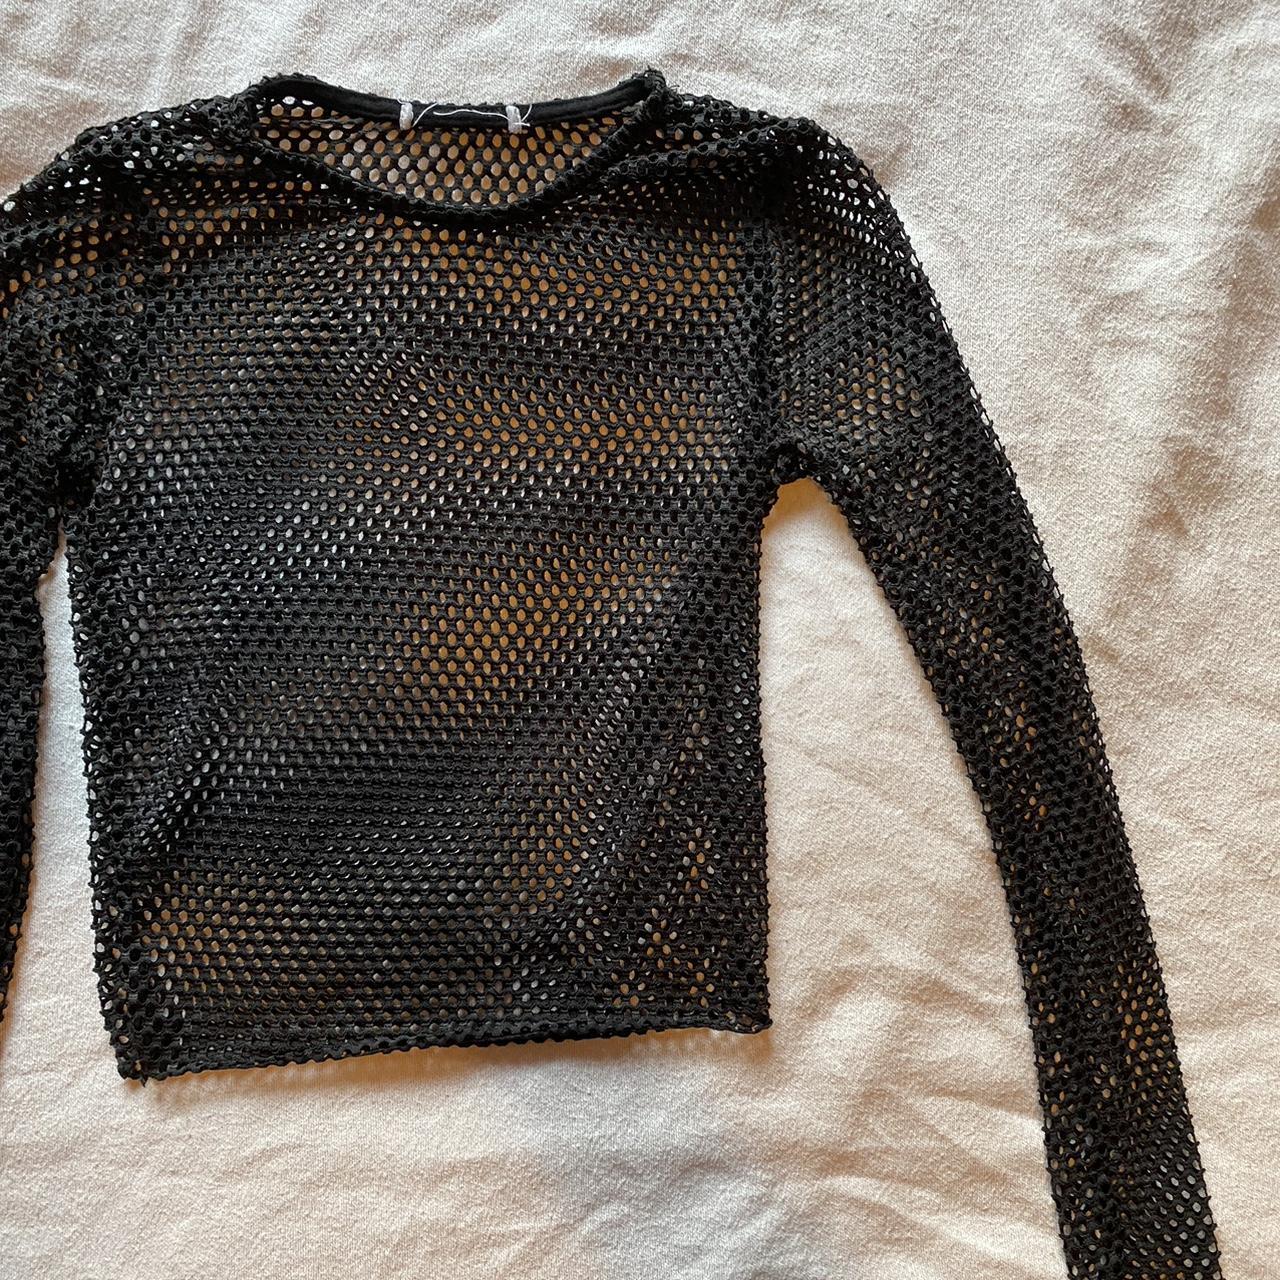 black long sleeve fishnet arms - size: no tag but... - Depop